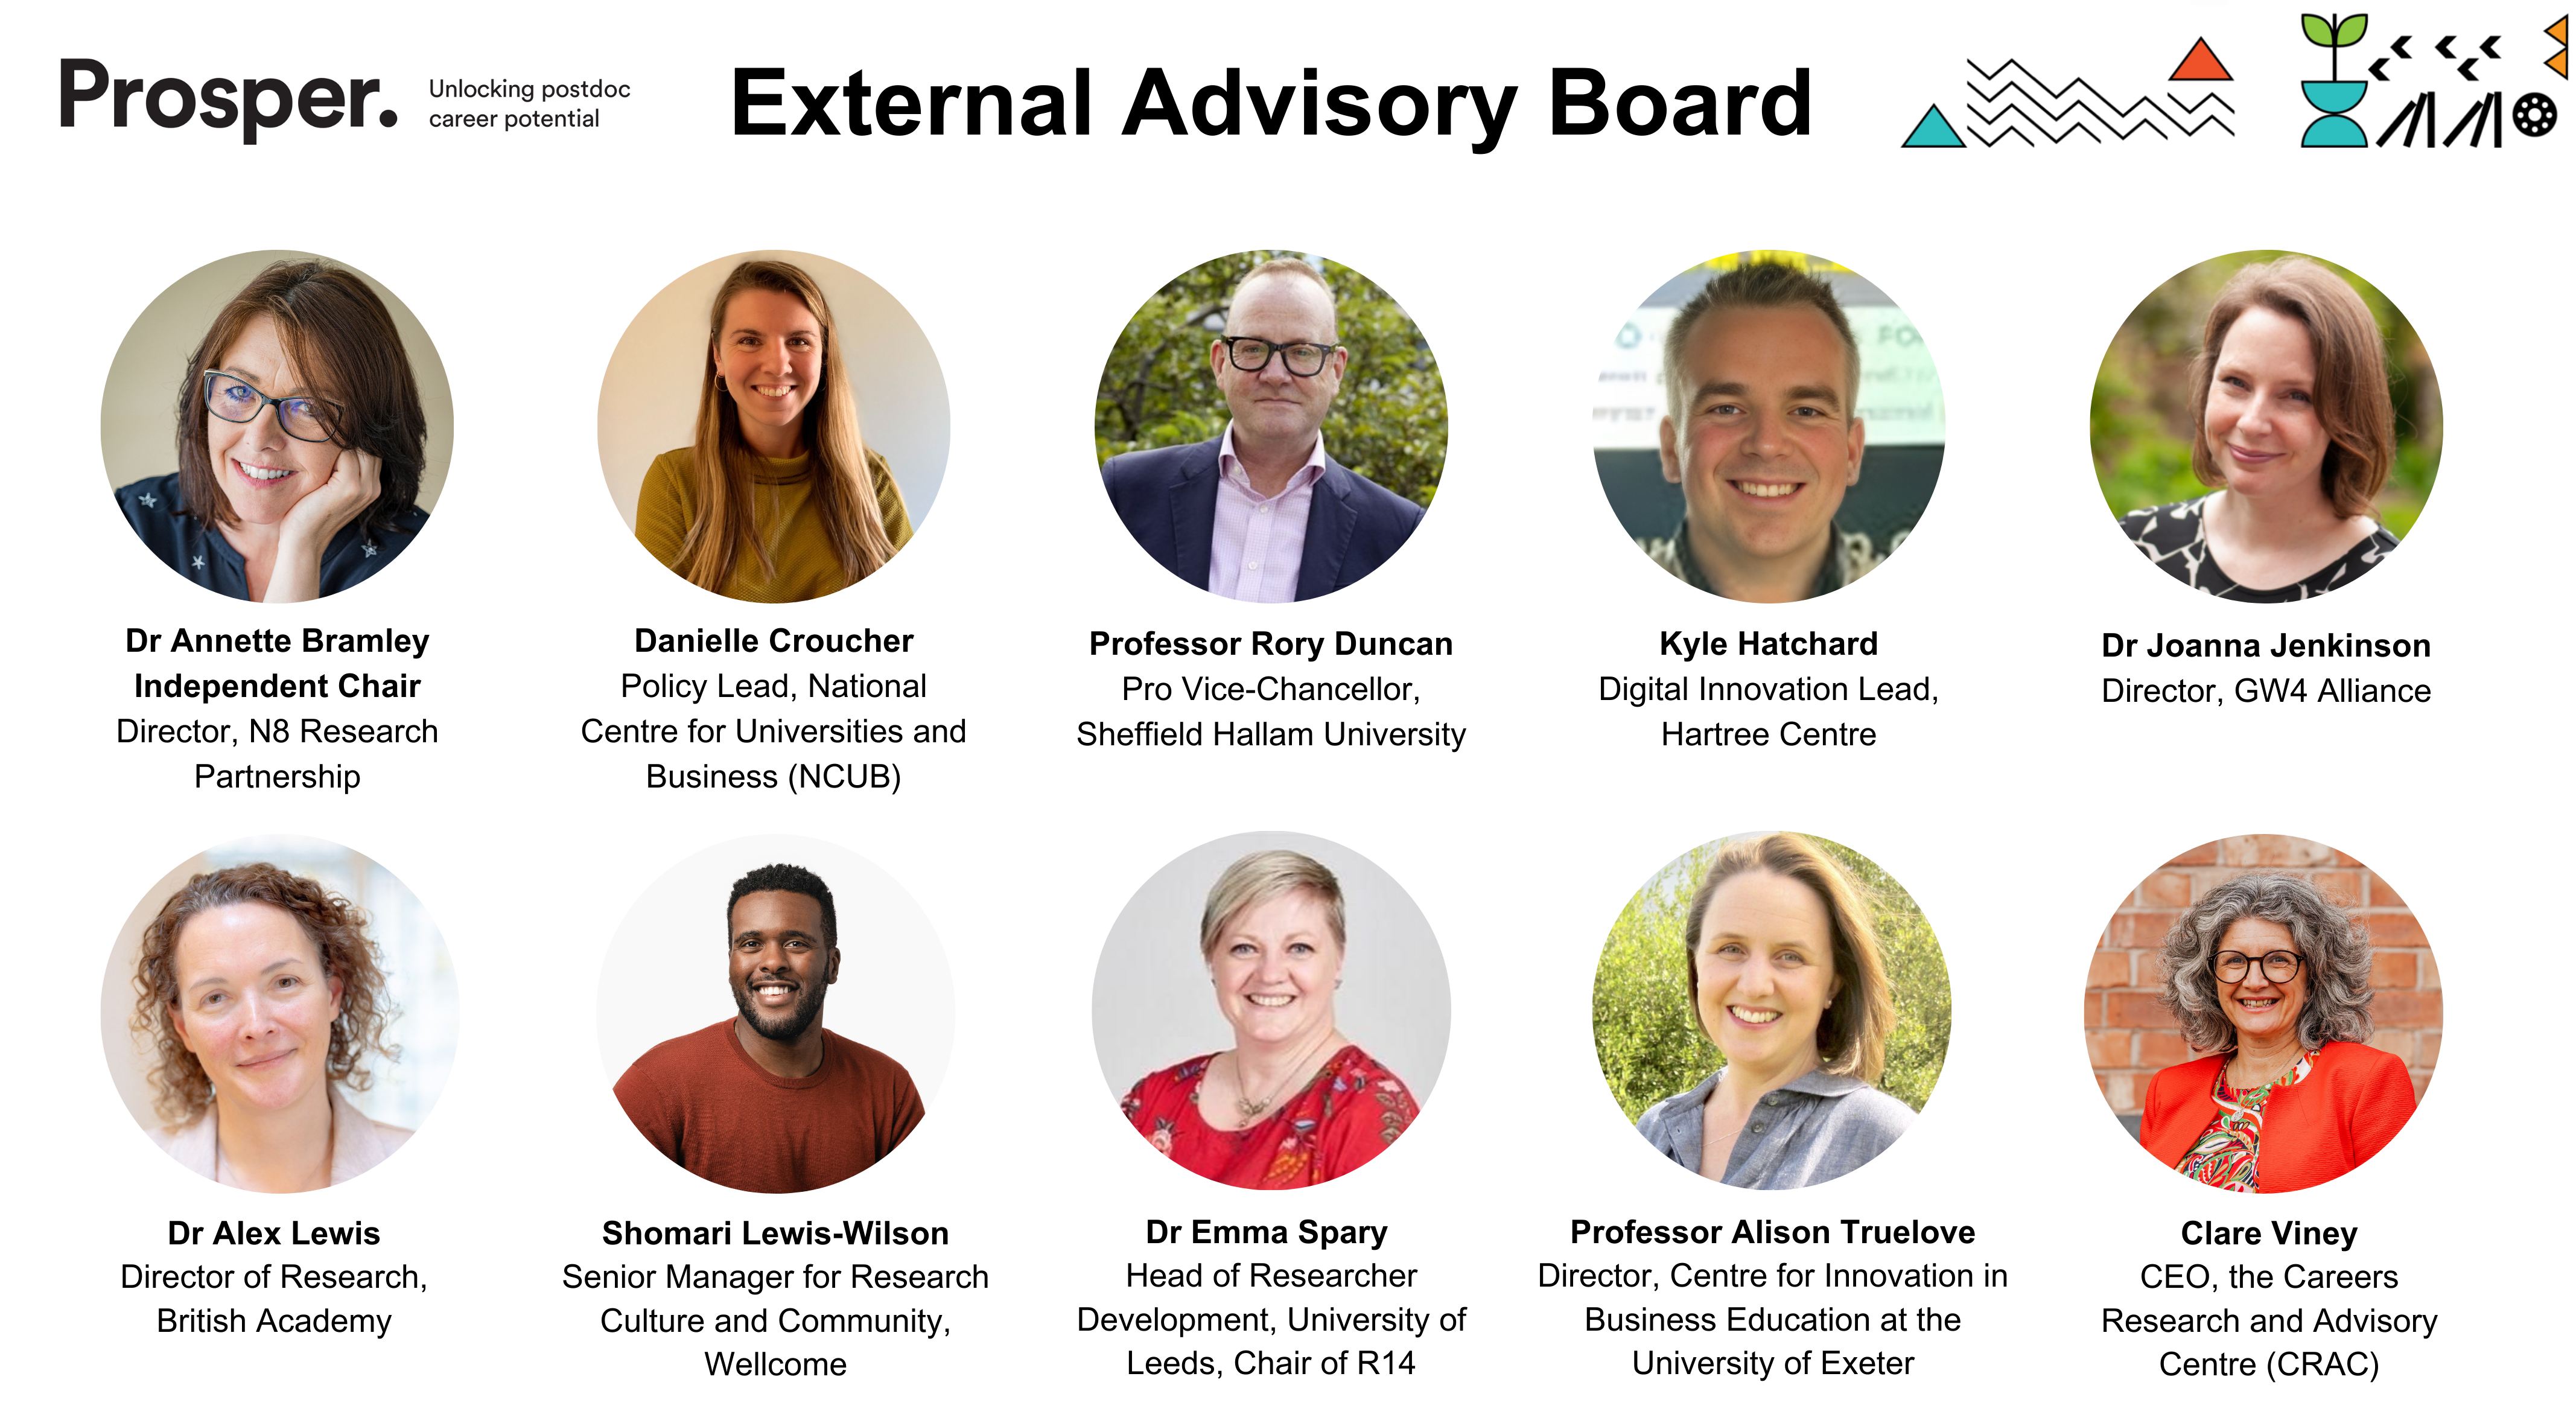 Prosper appoints External Advisory Board for sector rollout